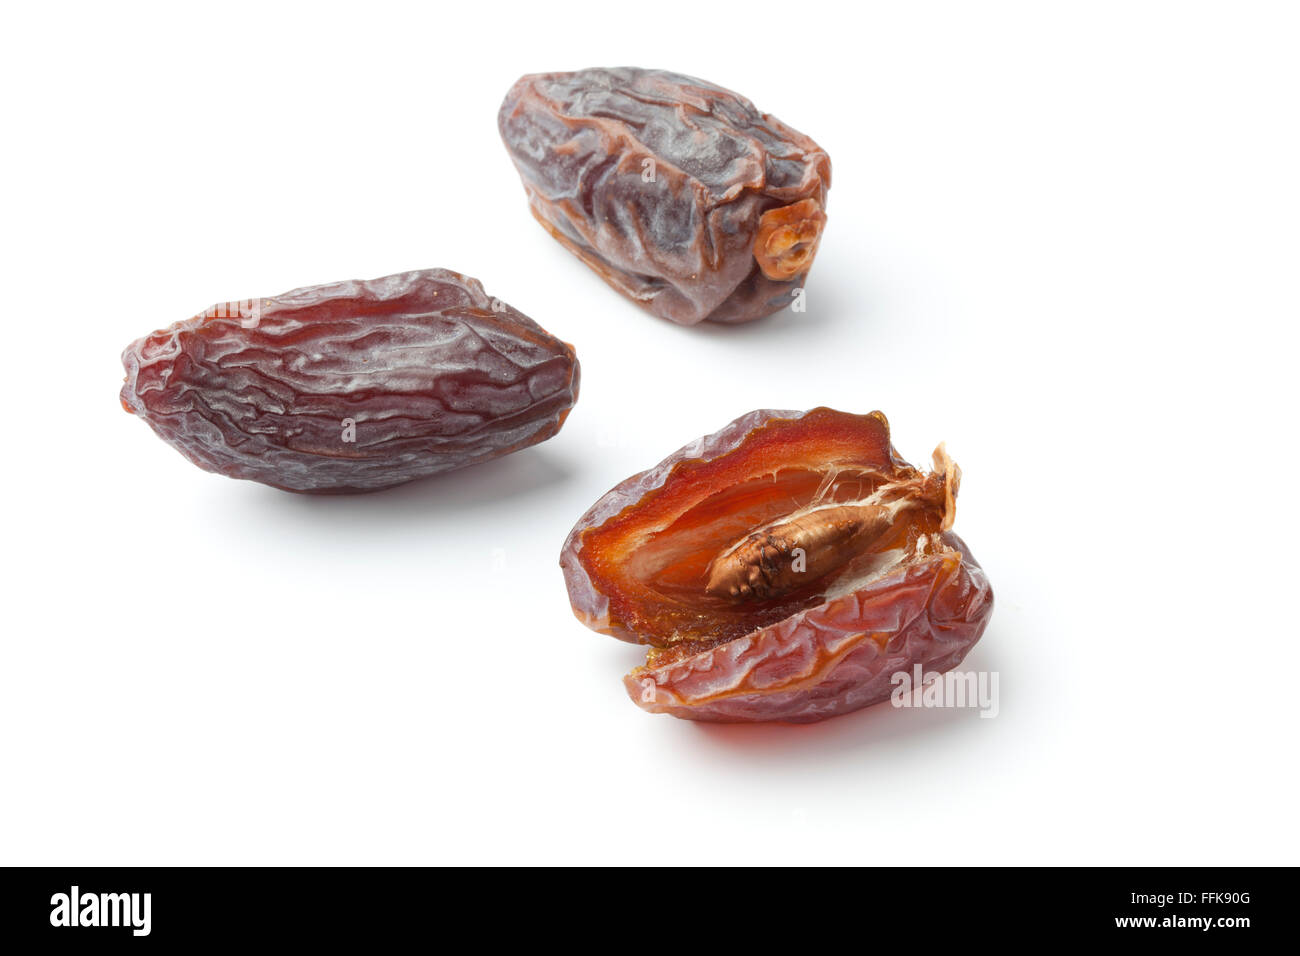 Whole and open dried dates on white background Stock Photo